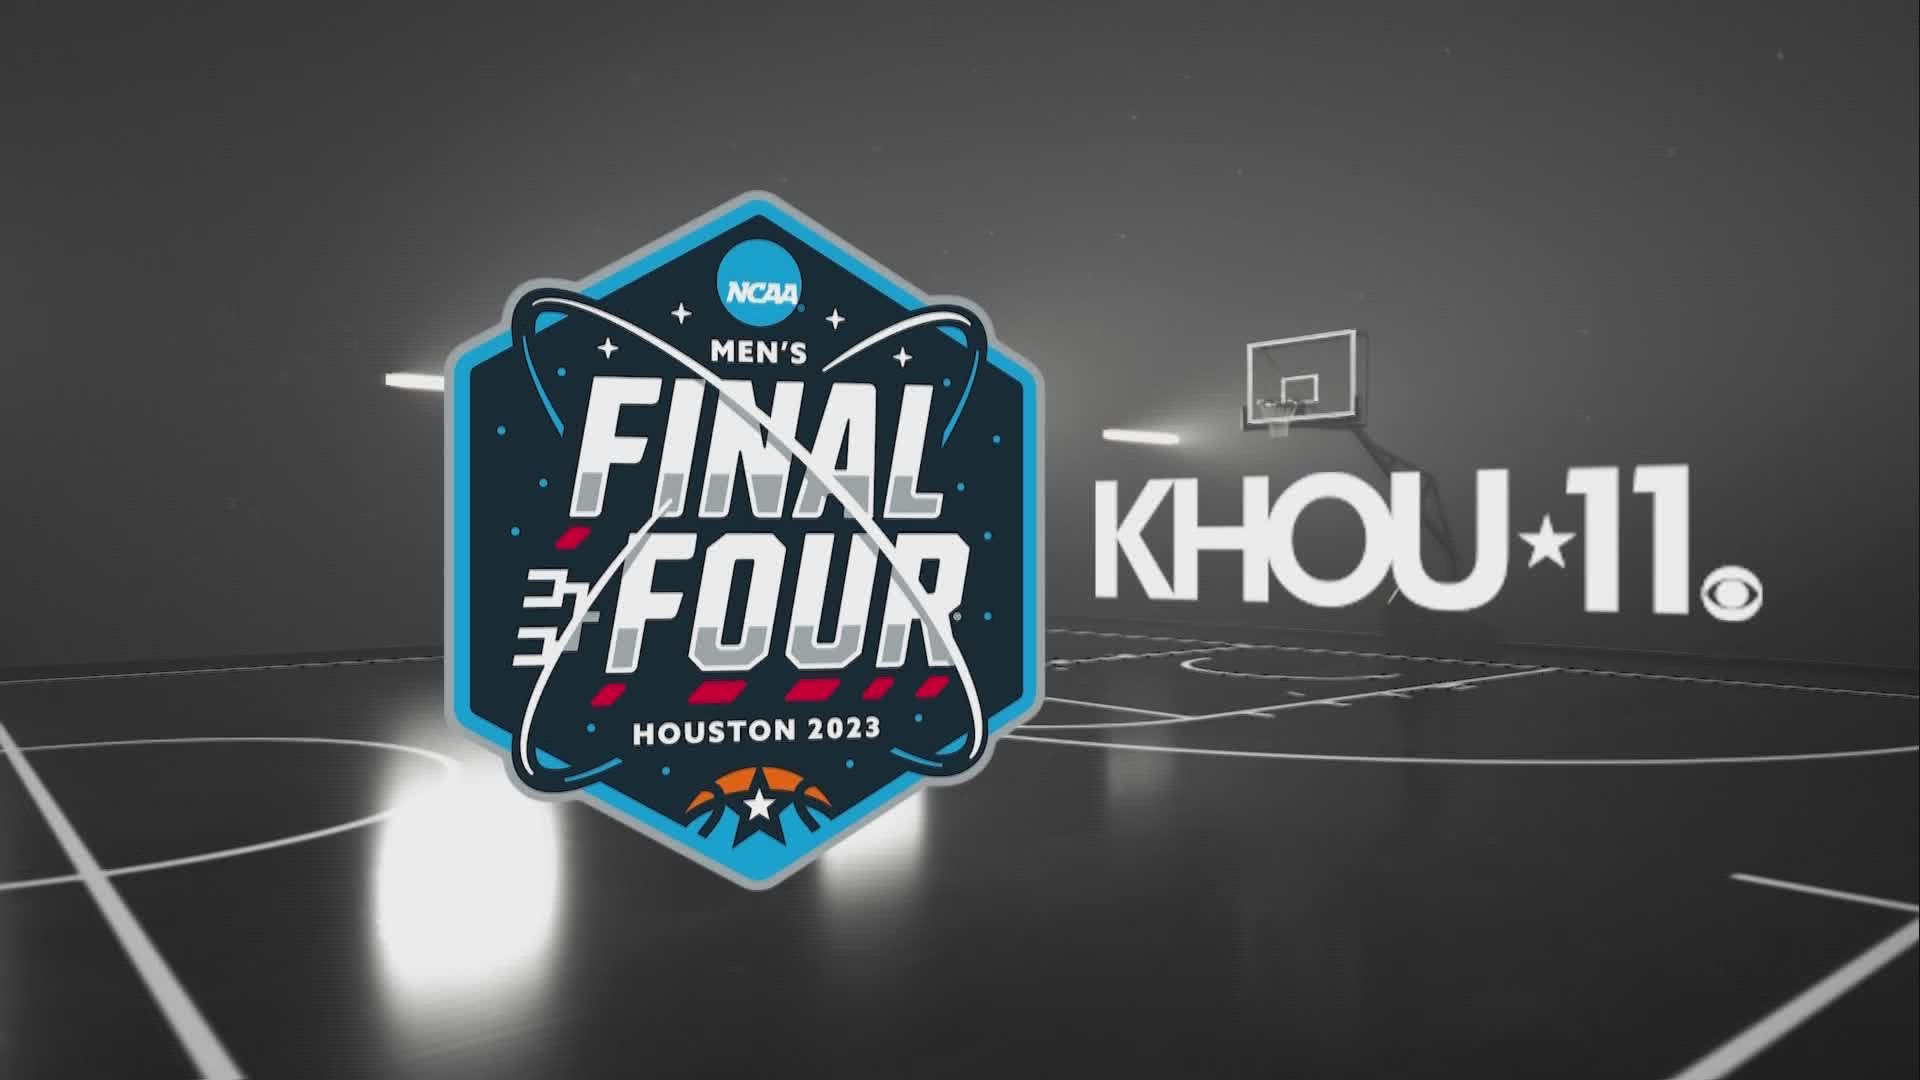 KHOU 11 had you covered for everything Final Four!